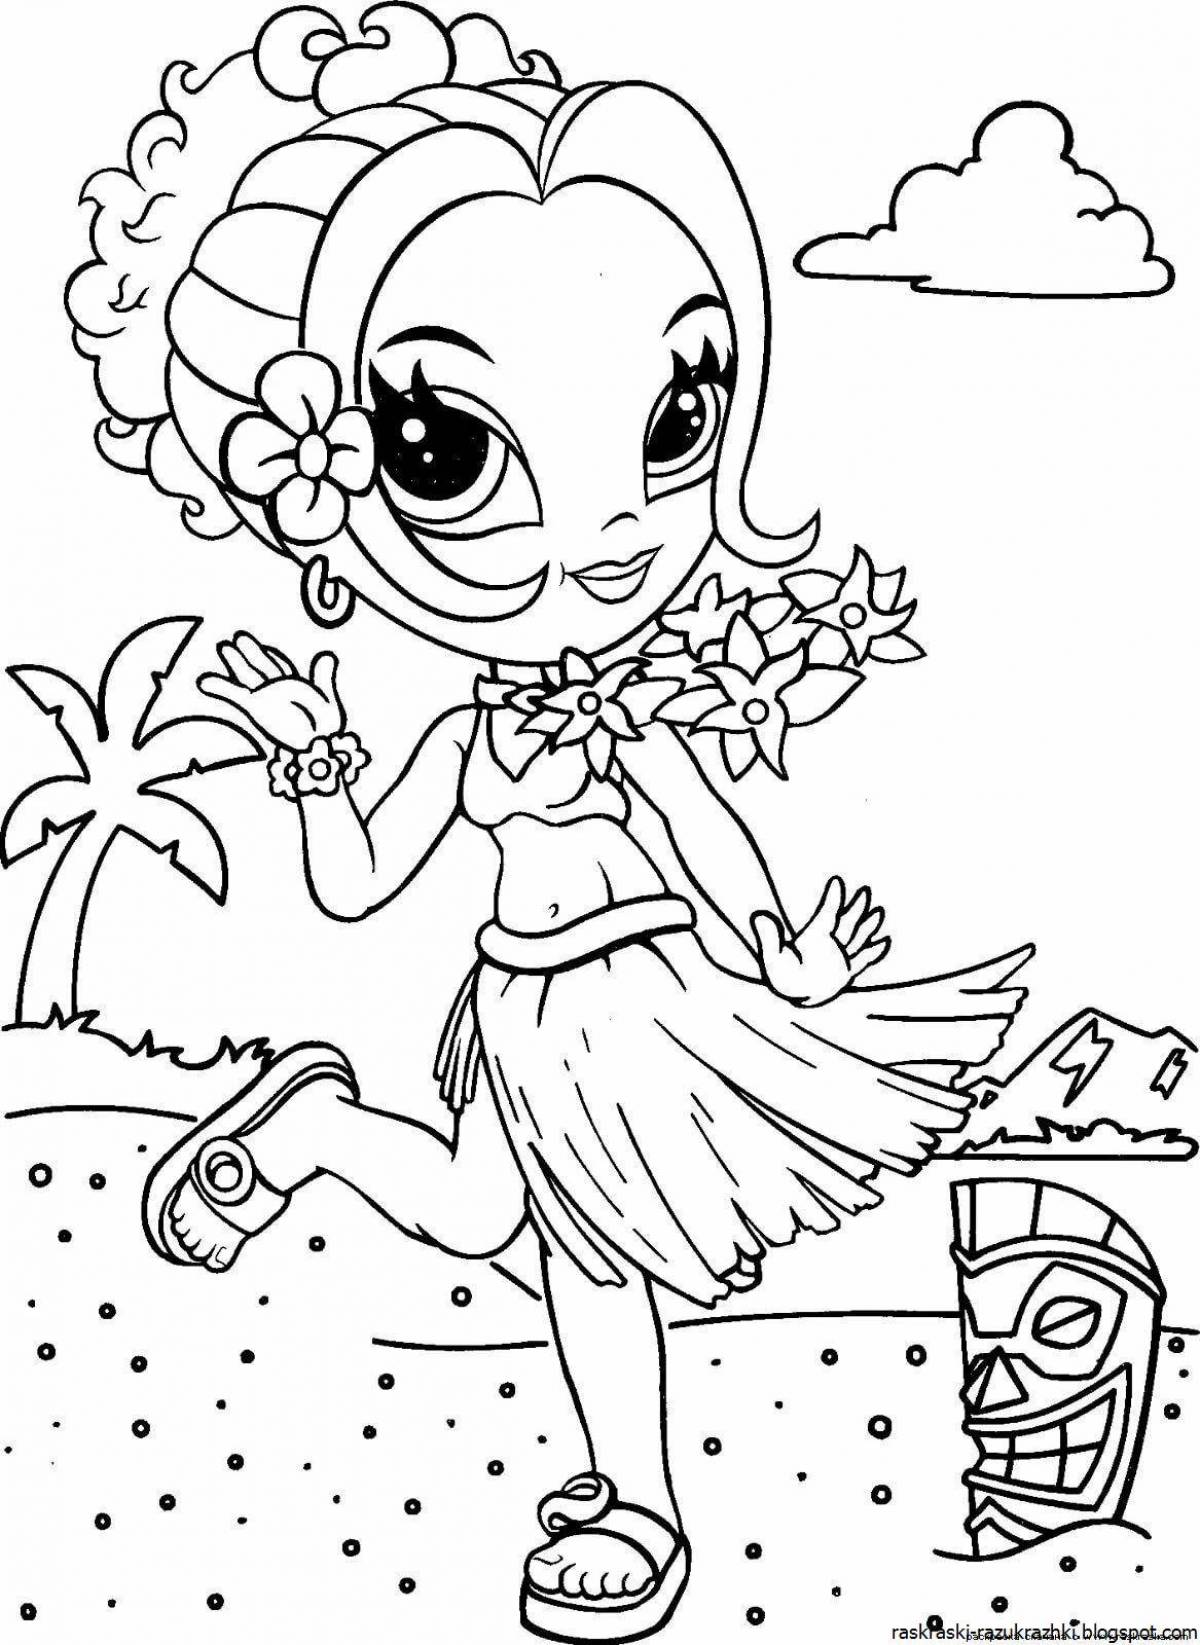 Creative coloring book for girls